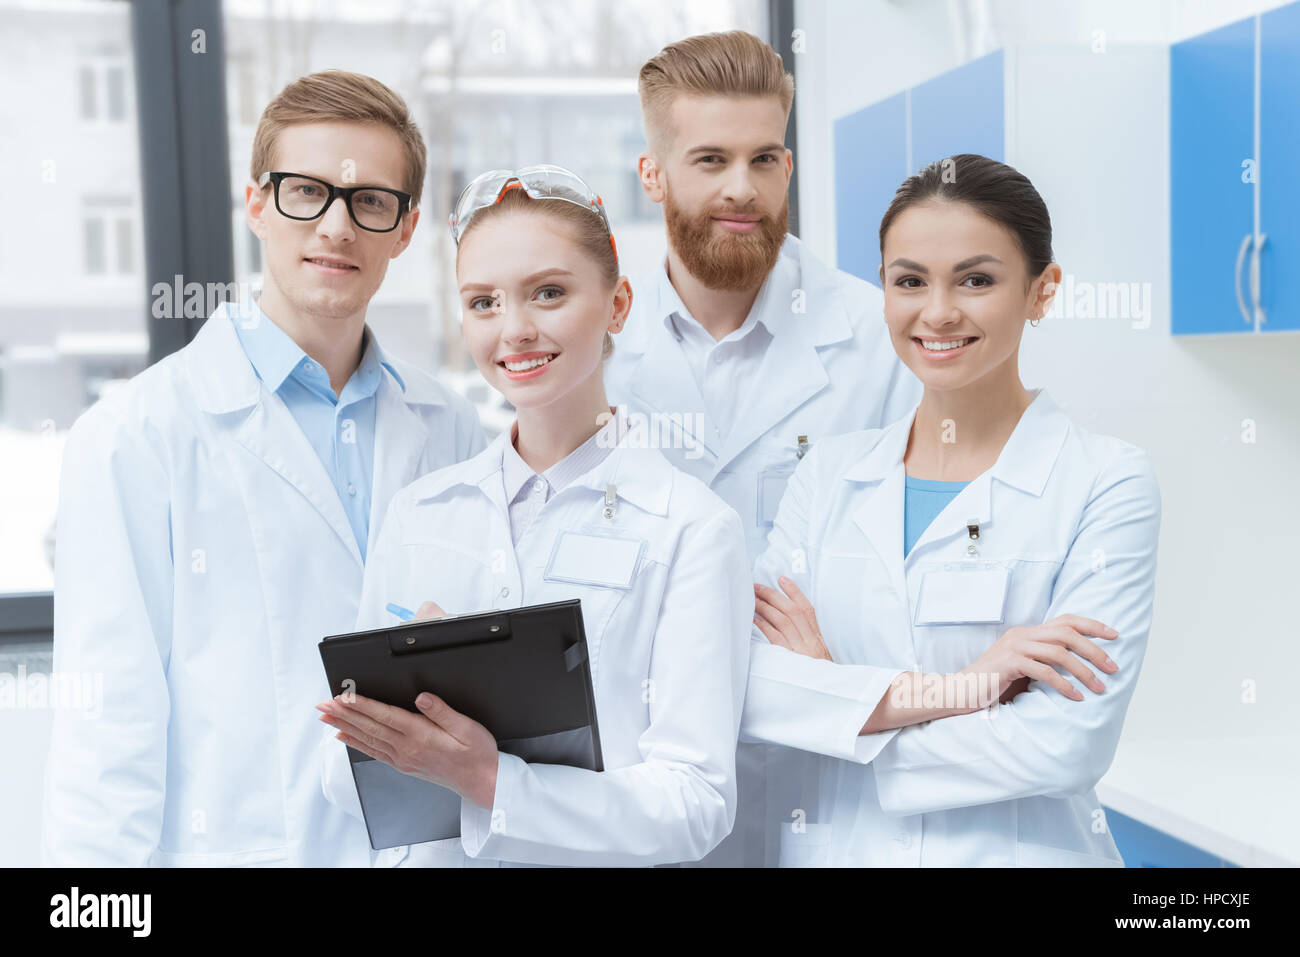 Team of young professional scientists in lab coats smiling at camera Stock Photo